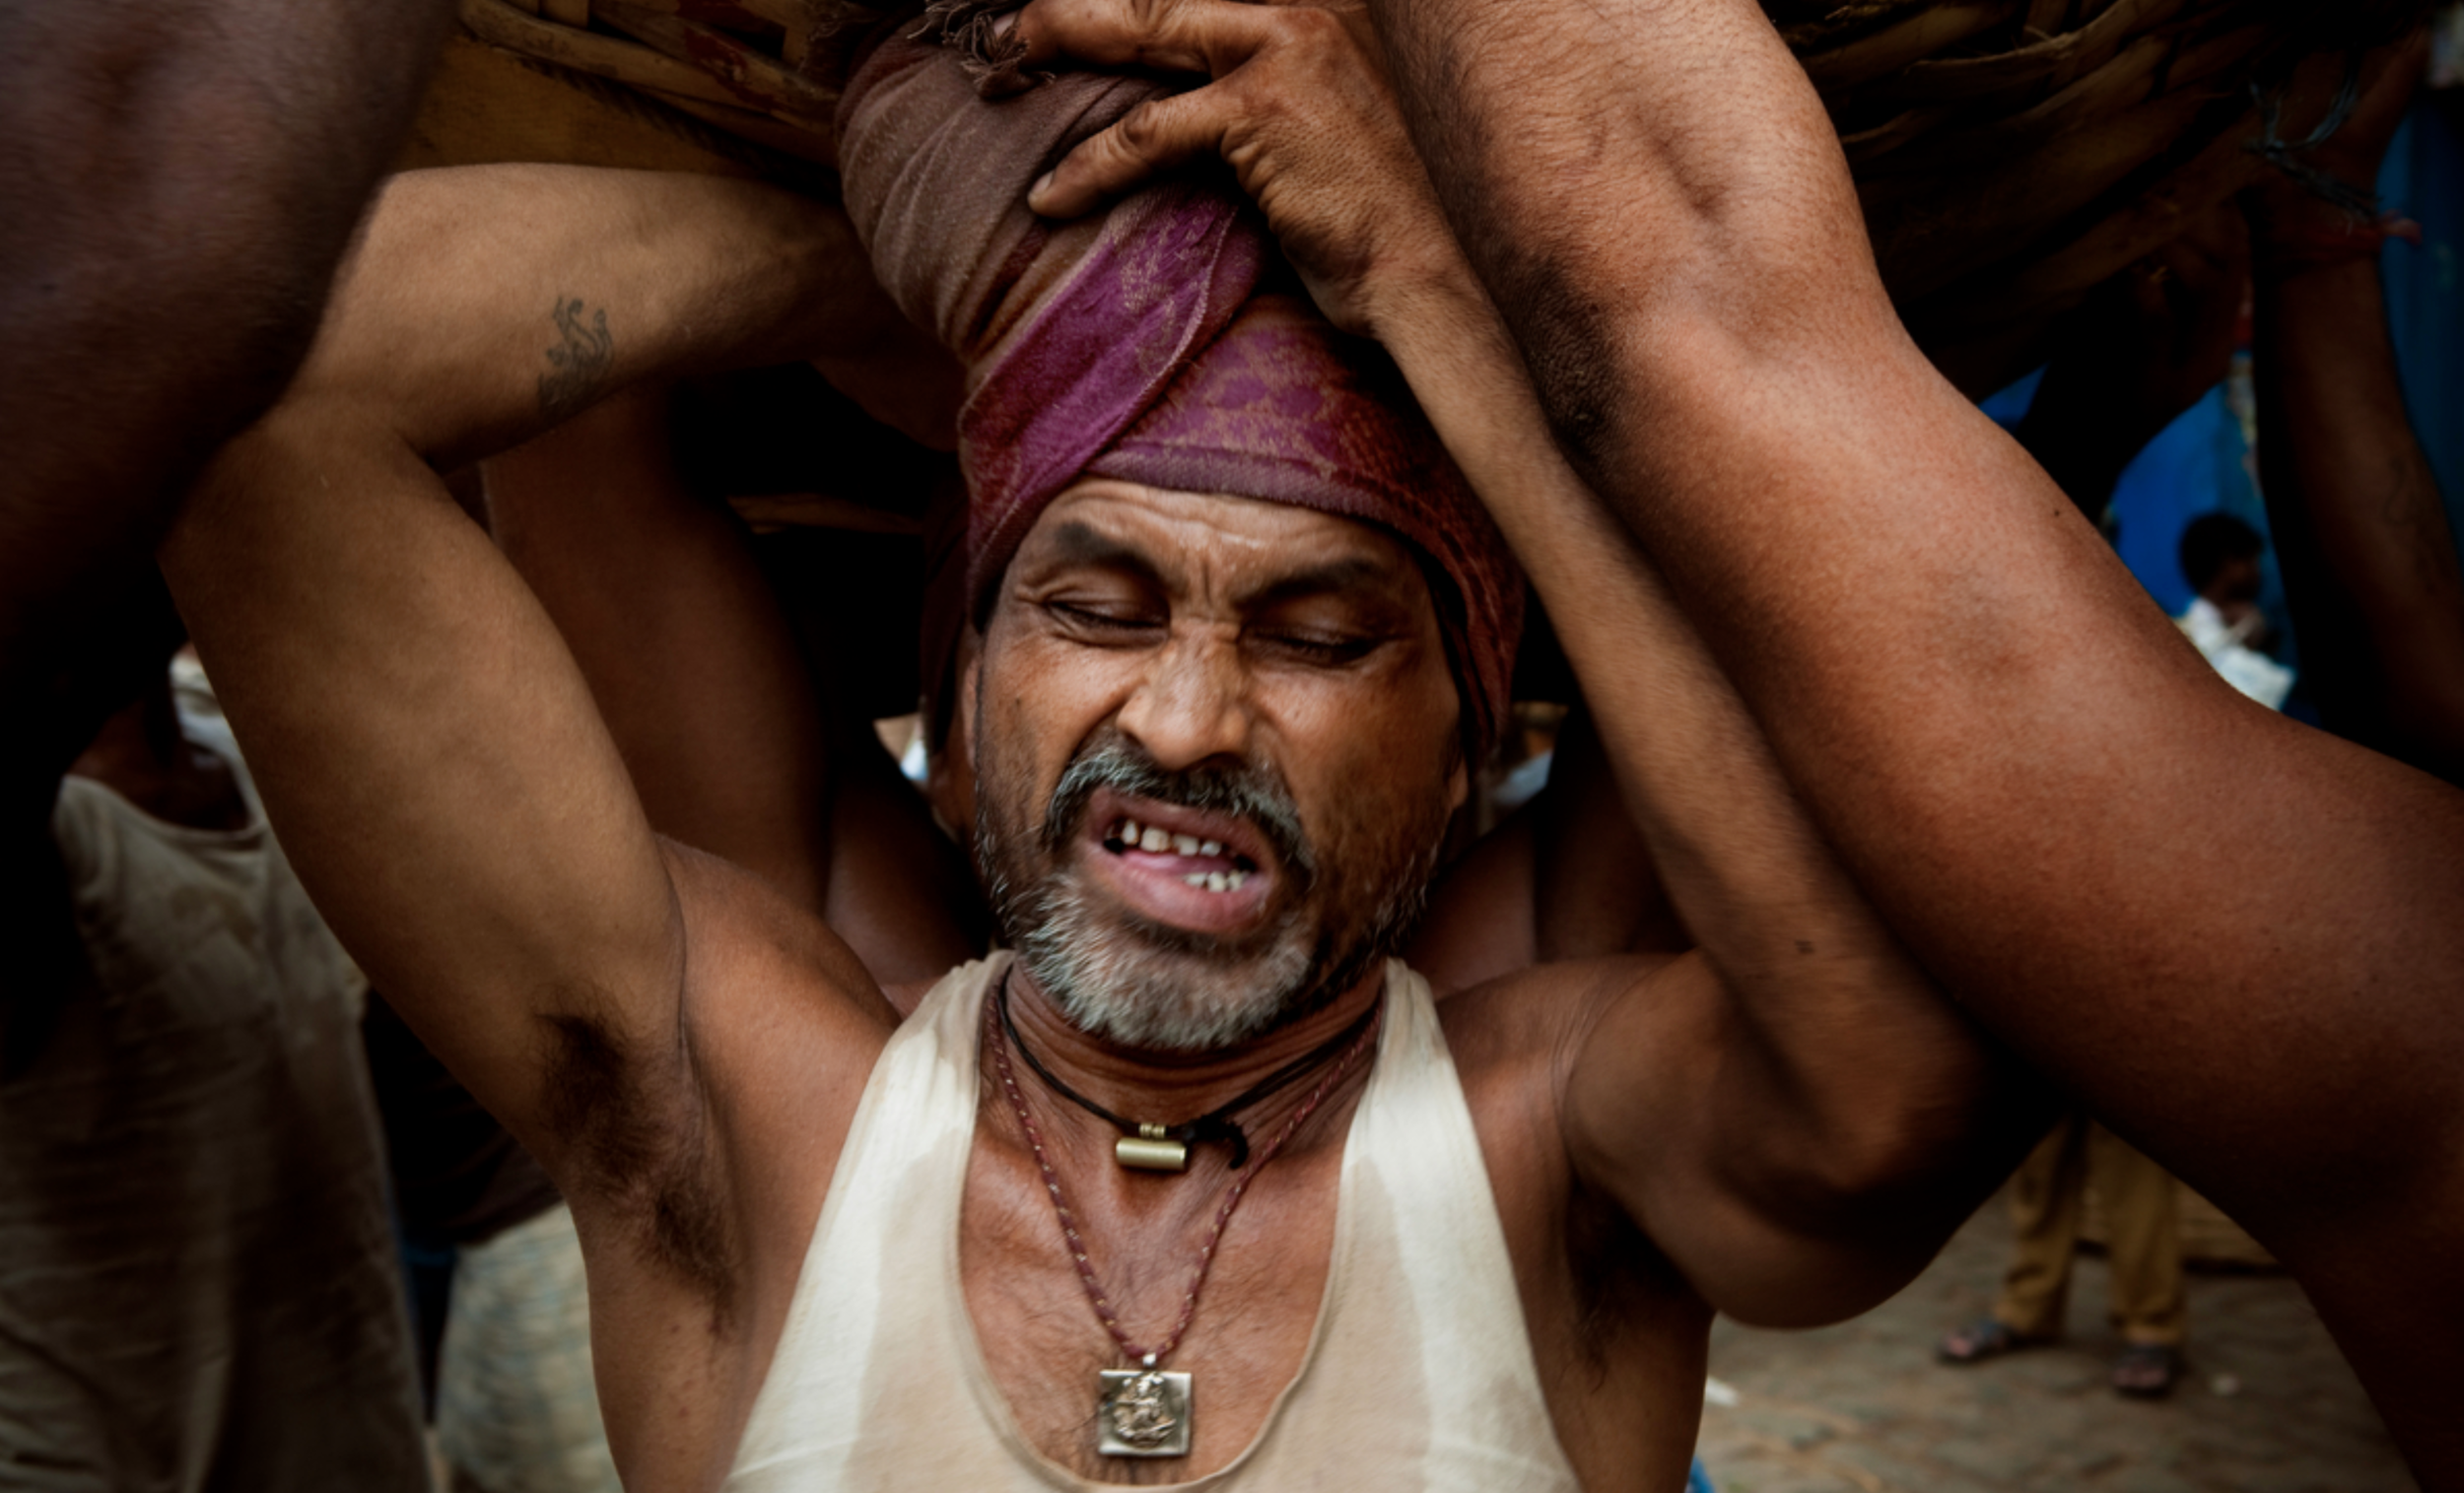  Ramashankar Yadav, who works a gruelling shift from 5pm to 5 am, says, "After an usual day I have pains in my shoulders and neck. Sometimes my legs hurt too." They start as young as 15 and by the age of 40 the pain gets unbearable. Then they retire 